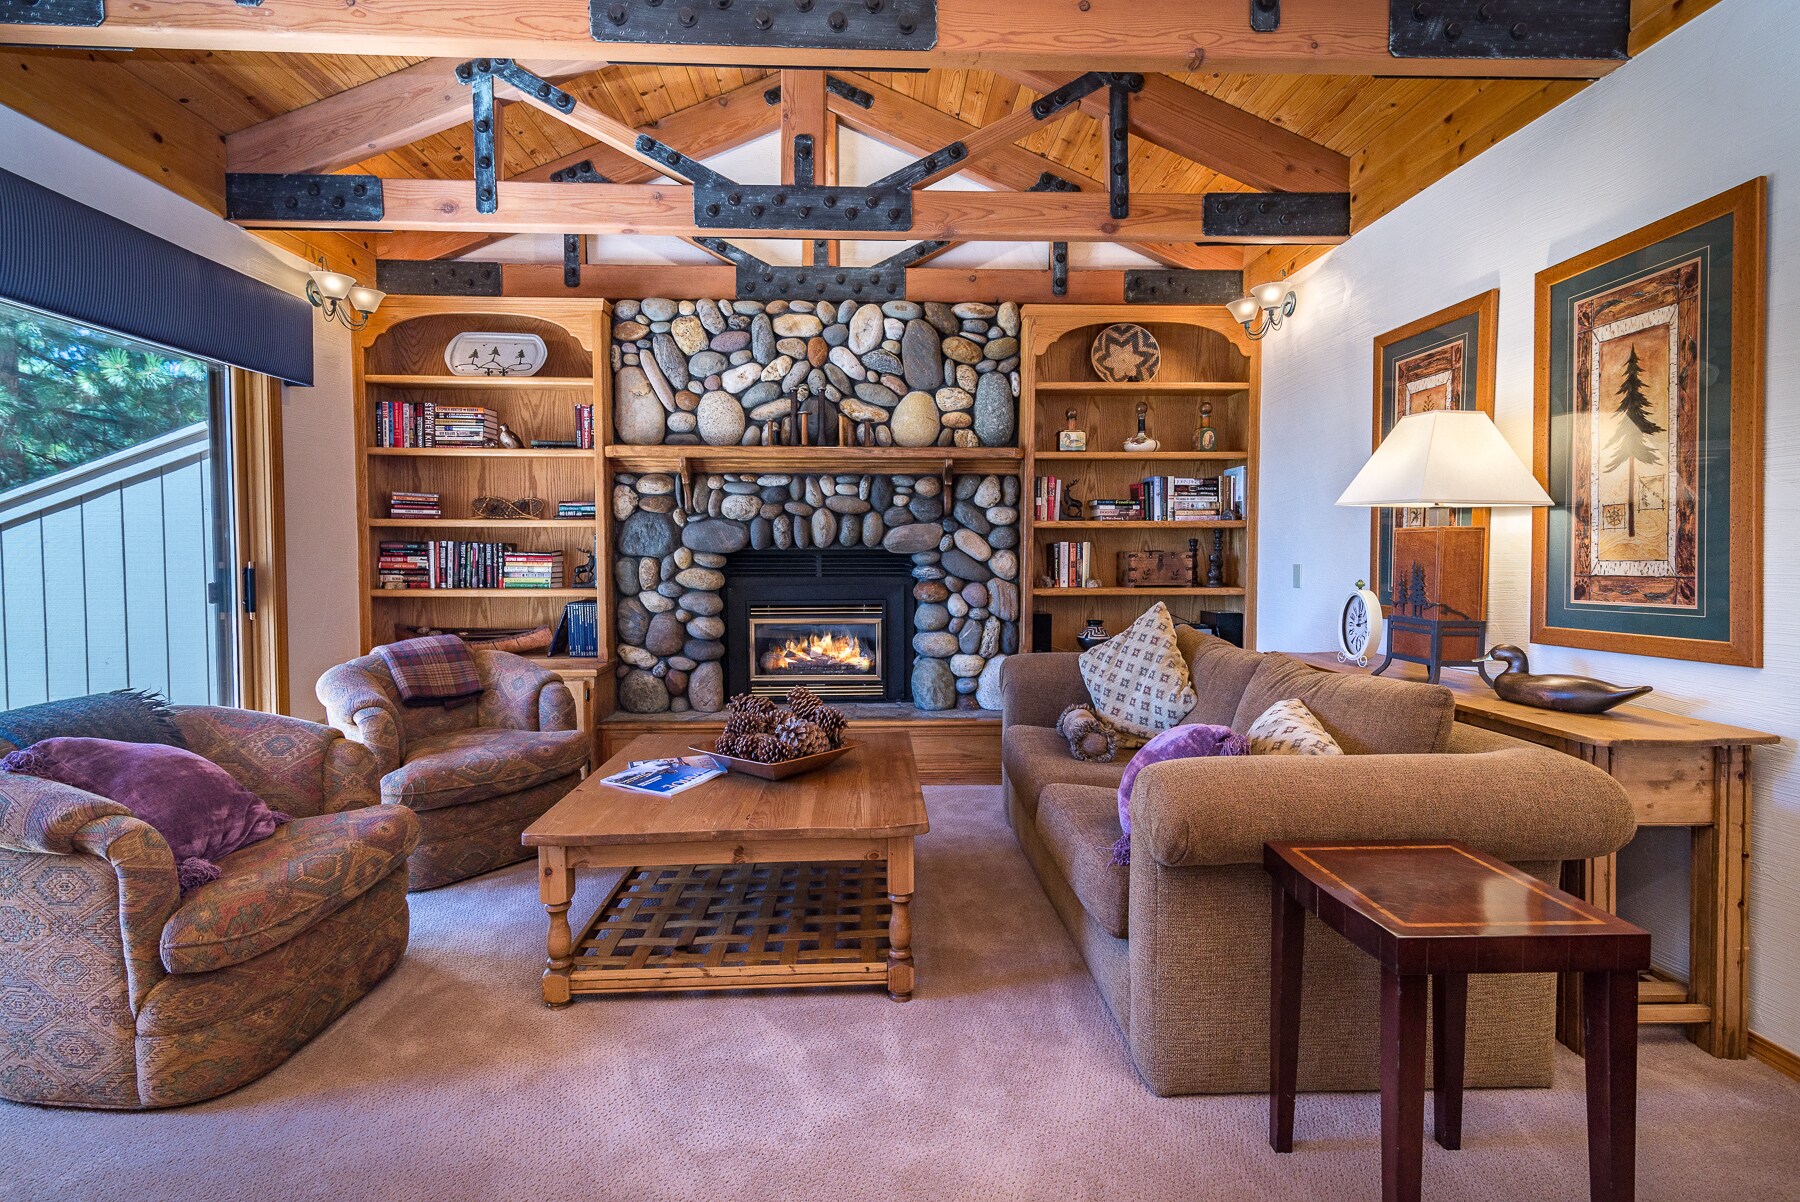 The cozy cabin-style living room invites you to snuggle up with a book.